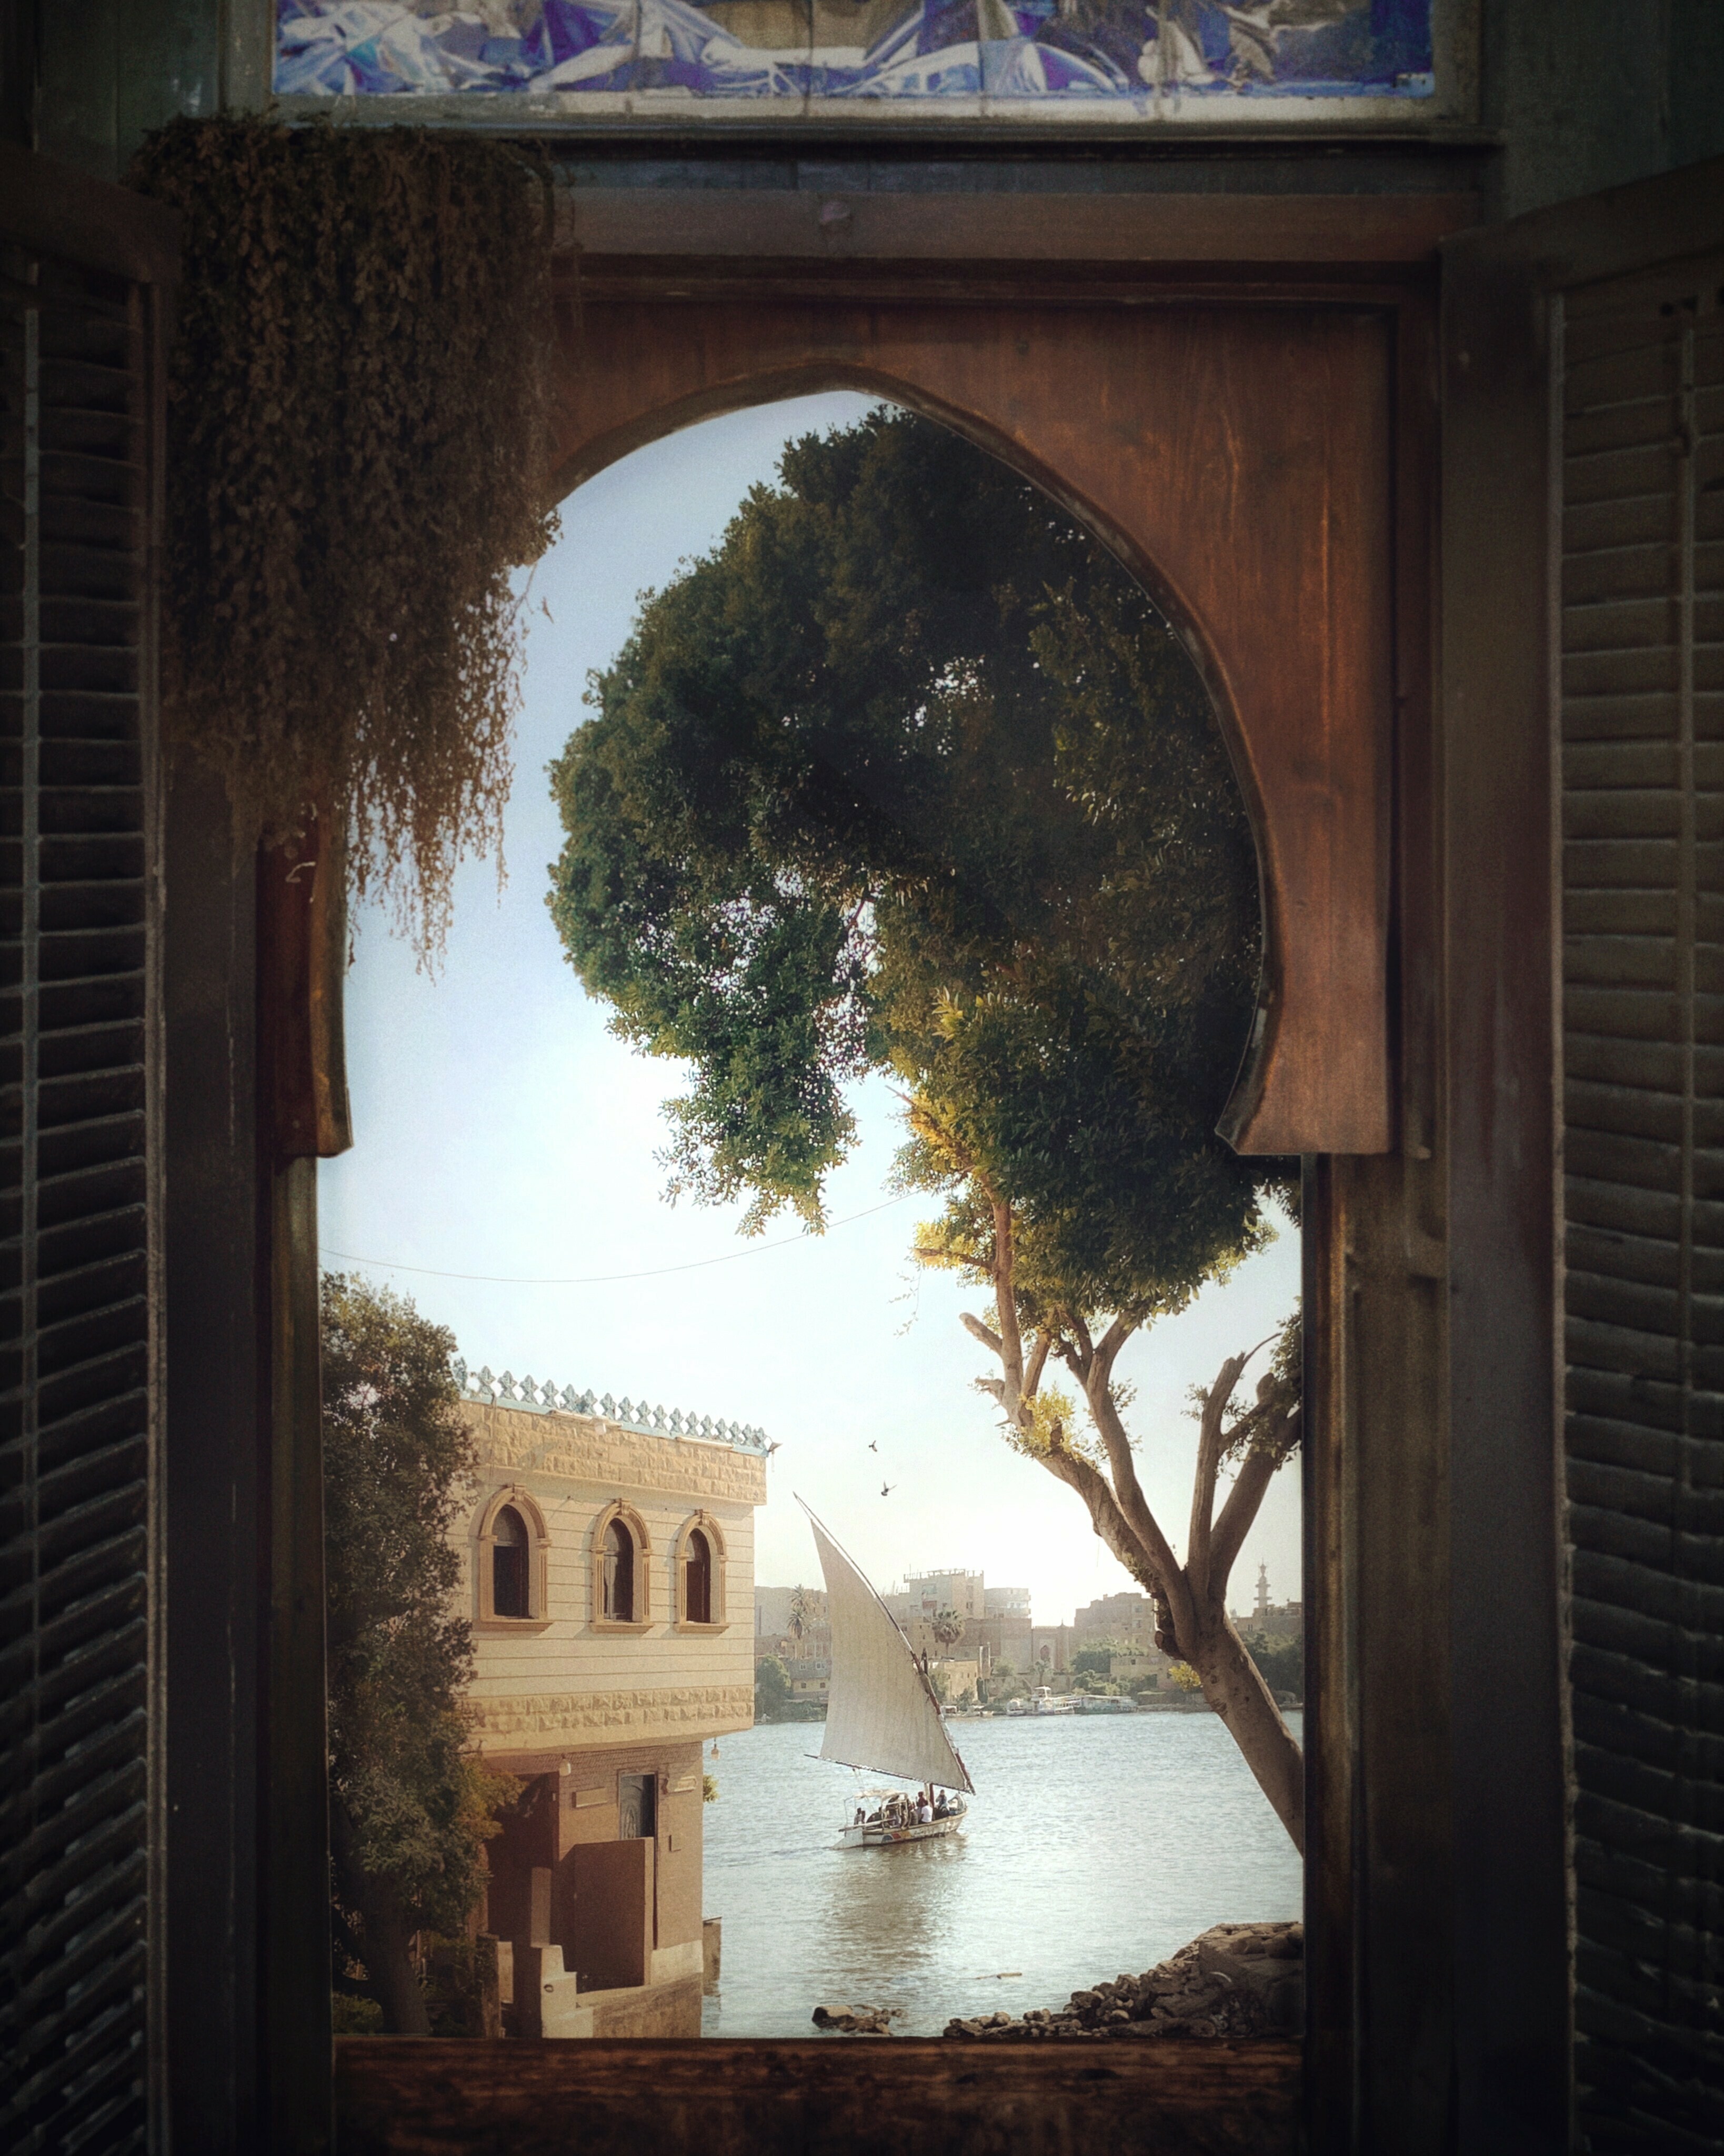 El Massry took this photo of a felucca sailing down the Nile in the south of Cairo on a morning in 2022. He digitally framed the image with a photo of a window in an old antique shop, and in his signature style, added a bird or two.